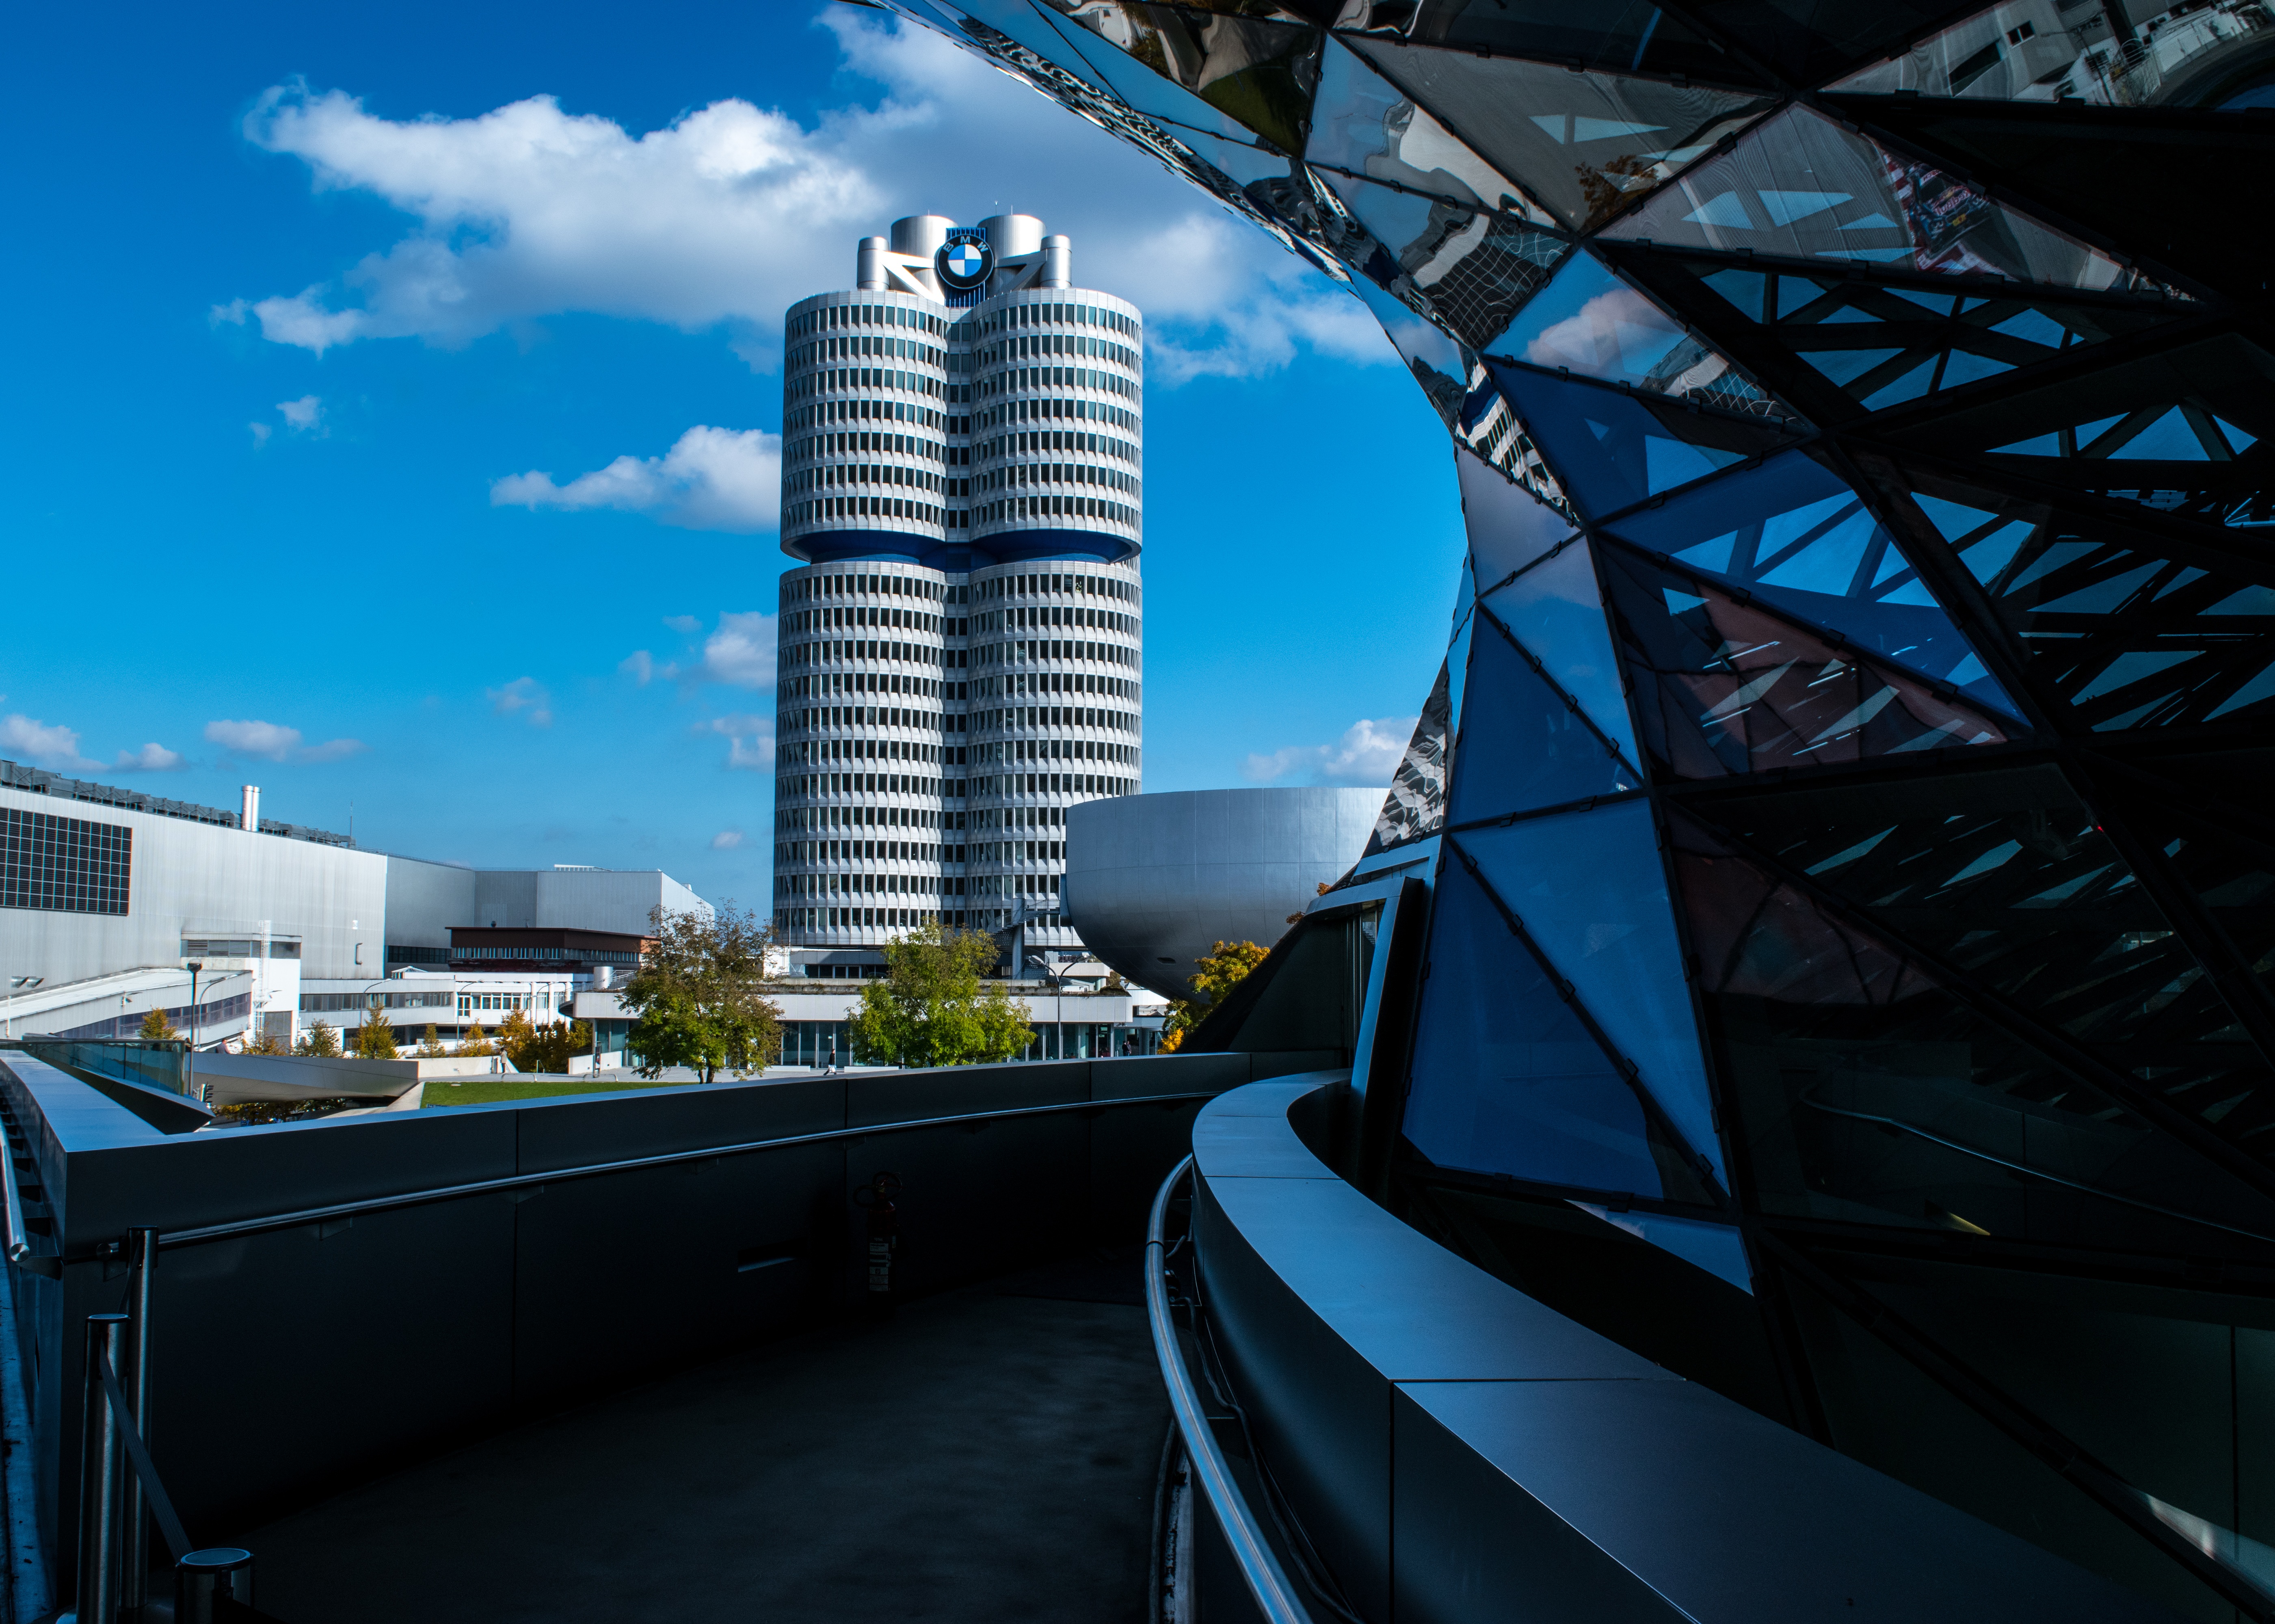 bmw, up to date, cities, modern, building, architecture, skyscrapers, structure